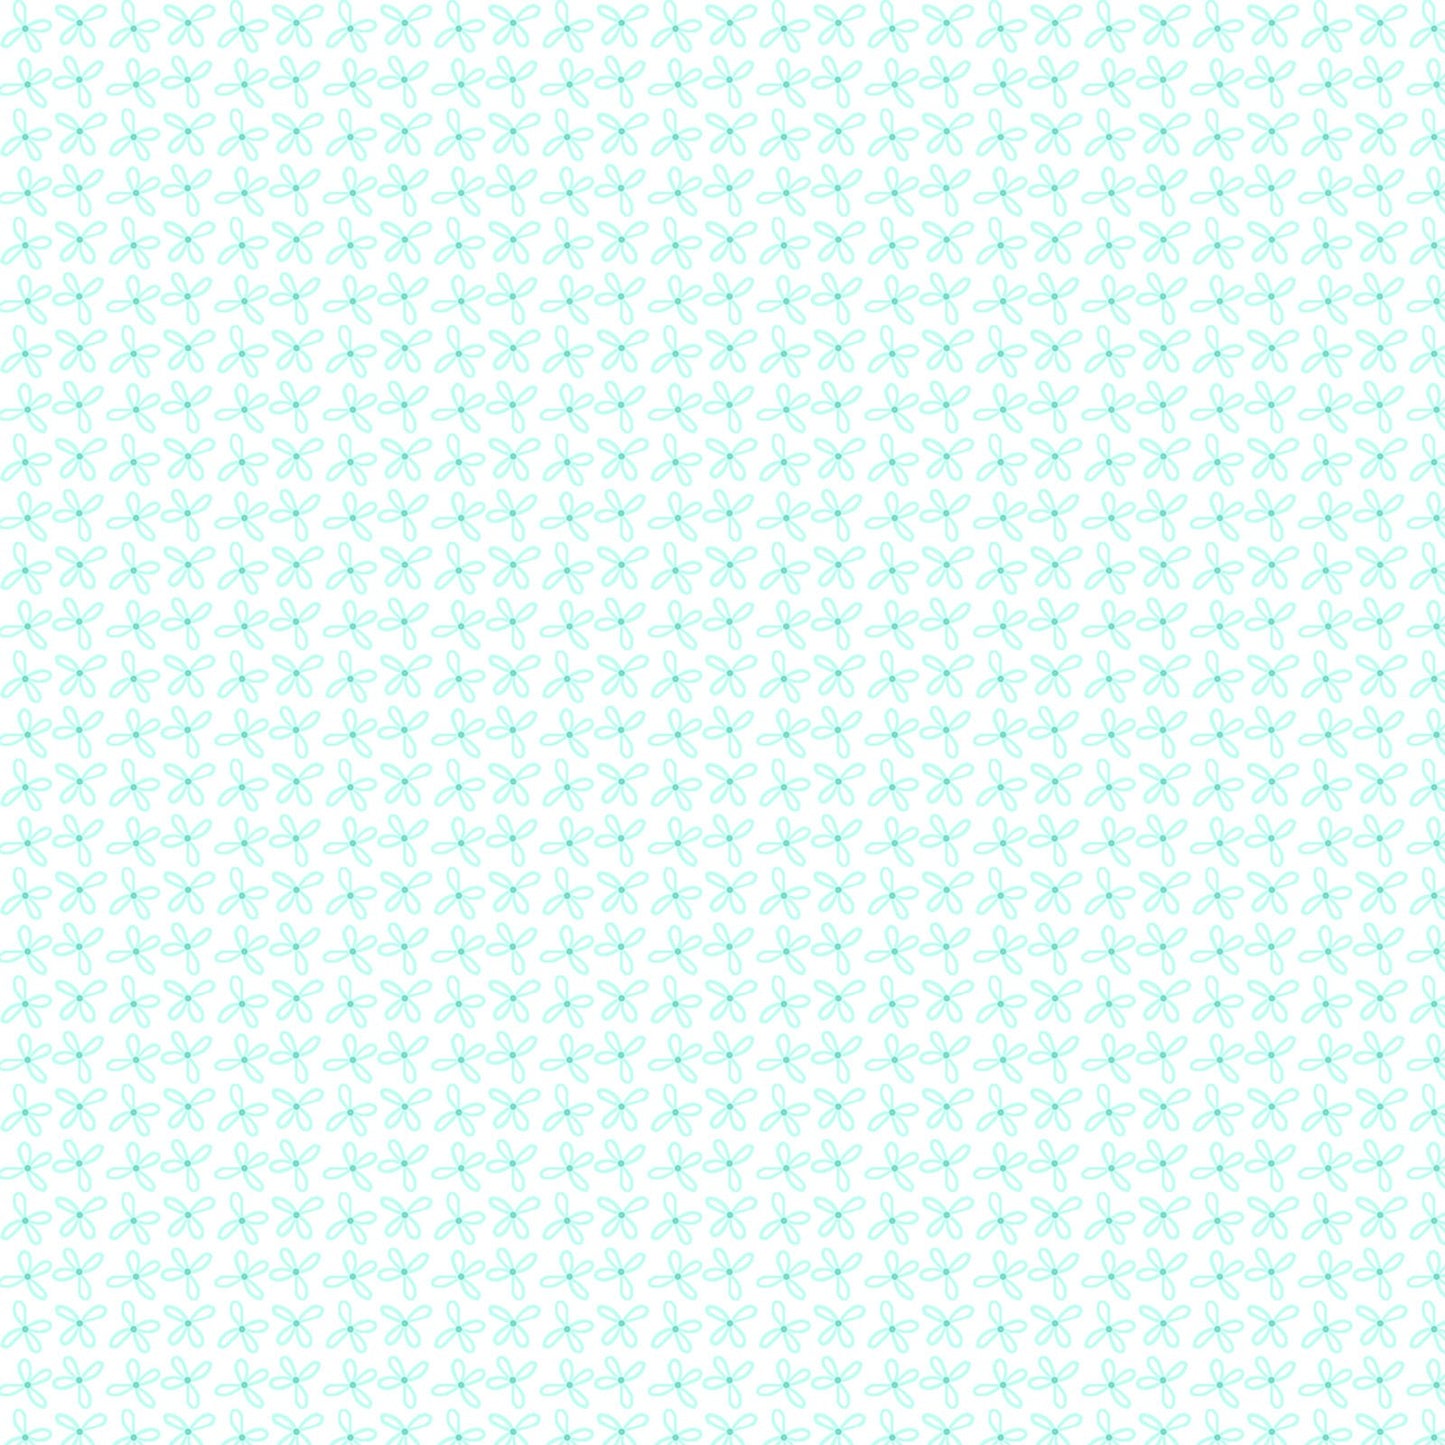 Contempo at Home fabric by the yard loopy daisy teal